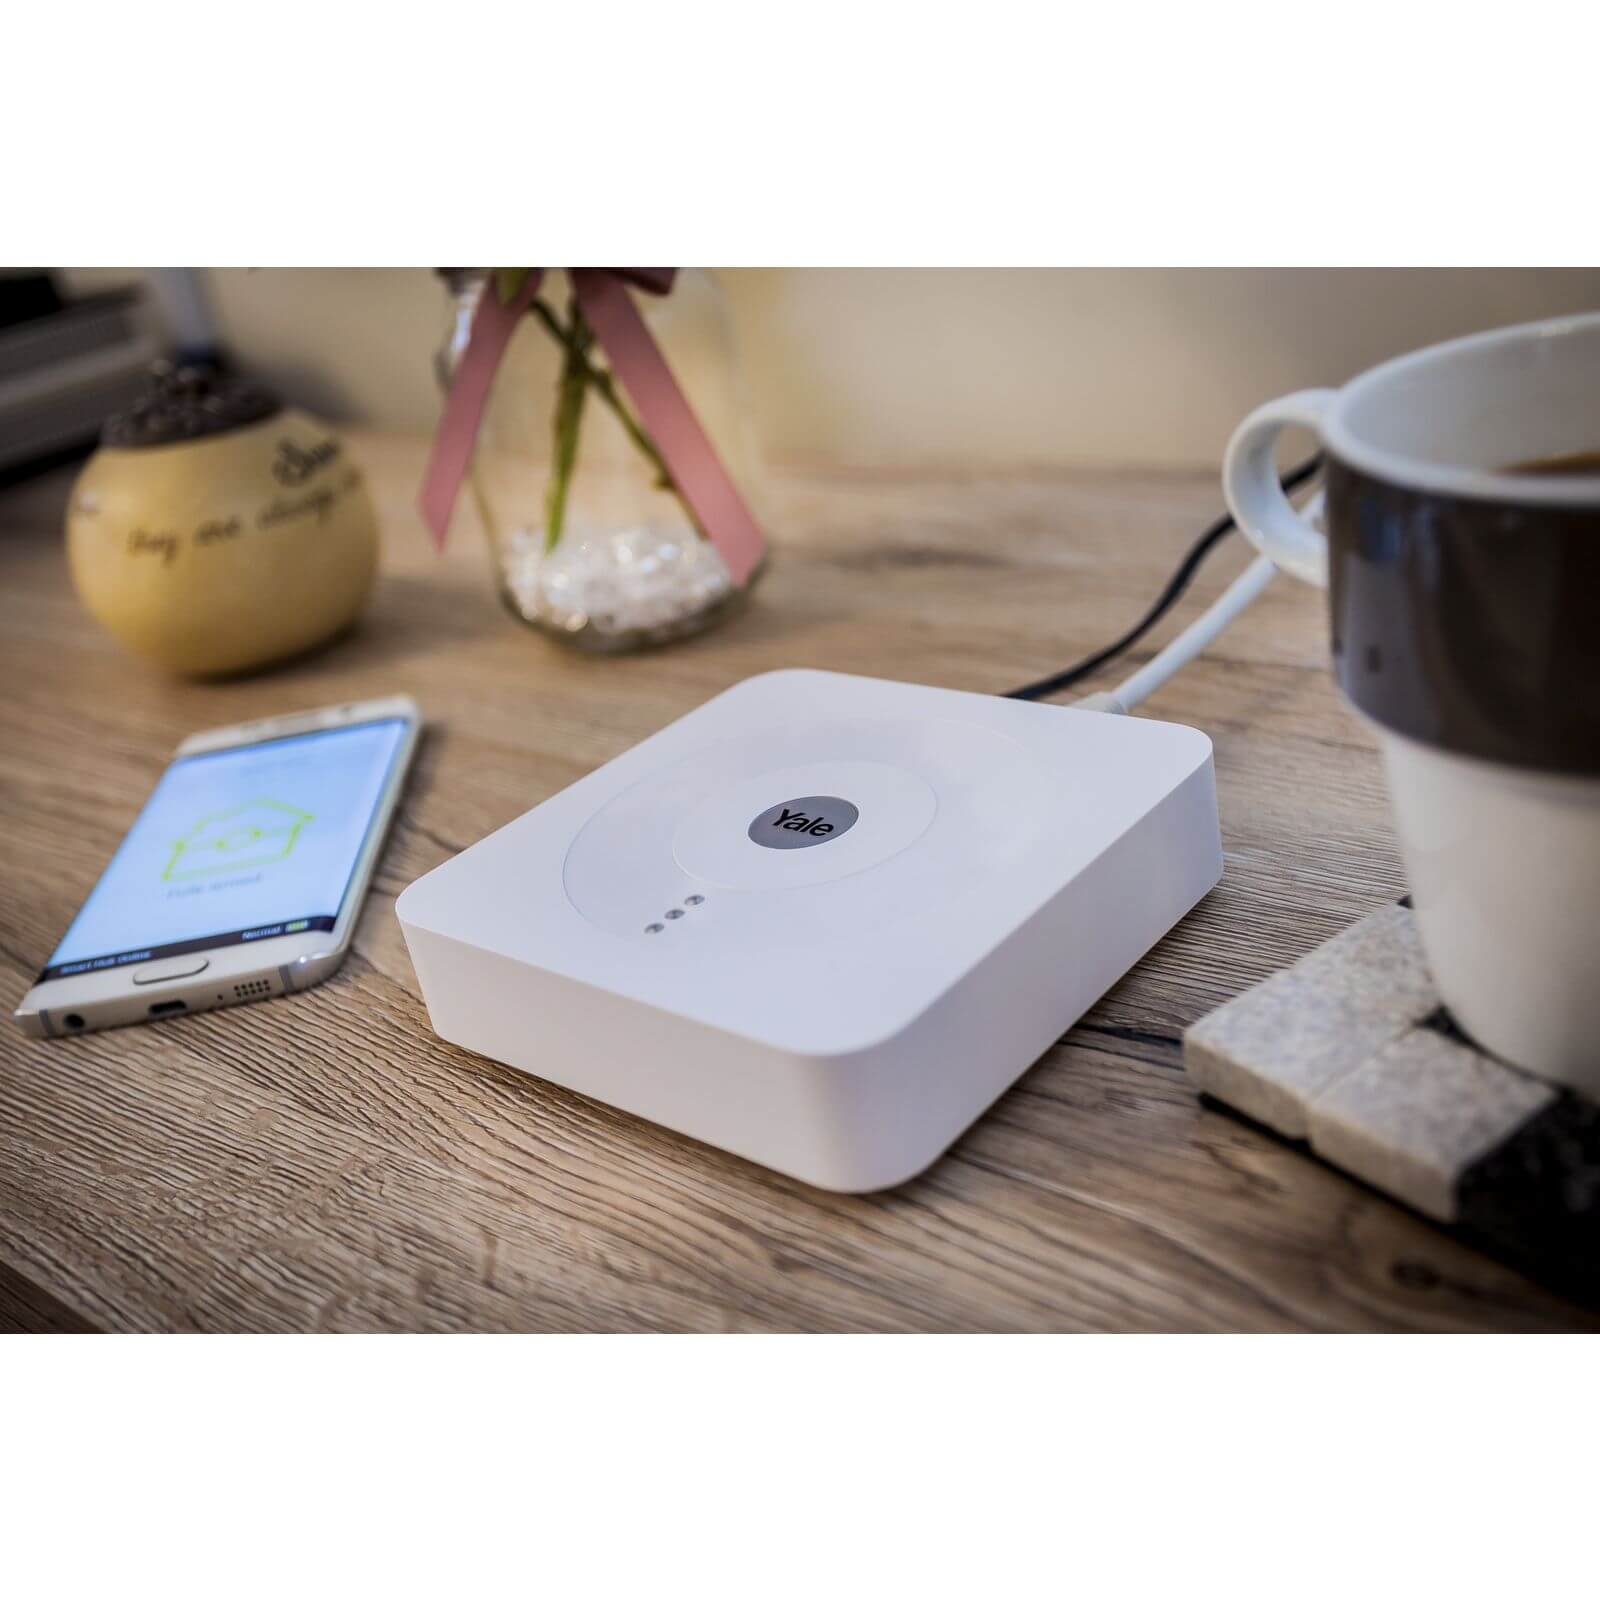 Yale Smart Alarm and View Kit